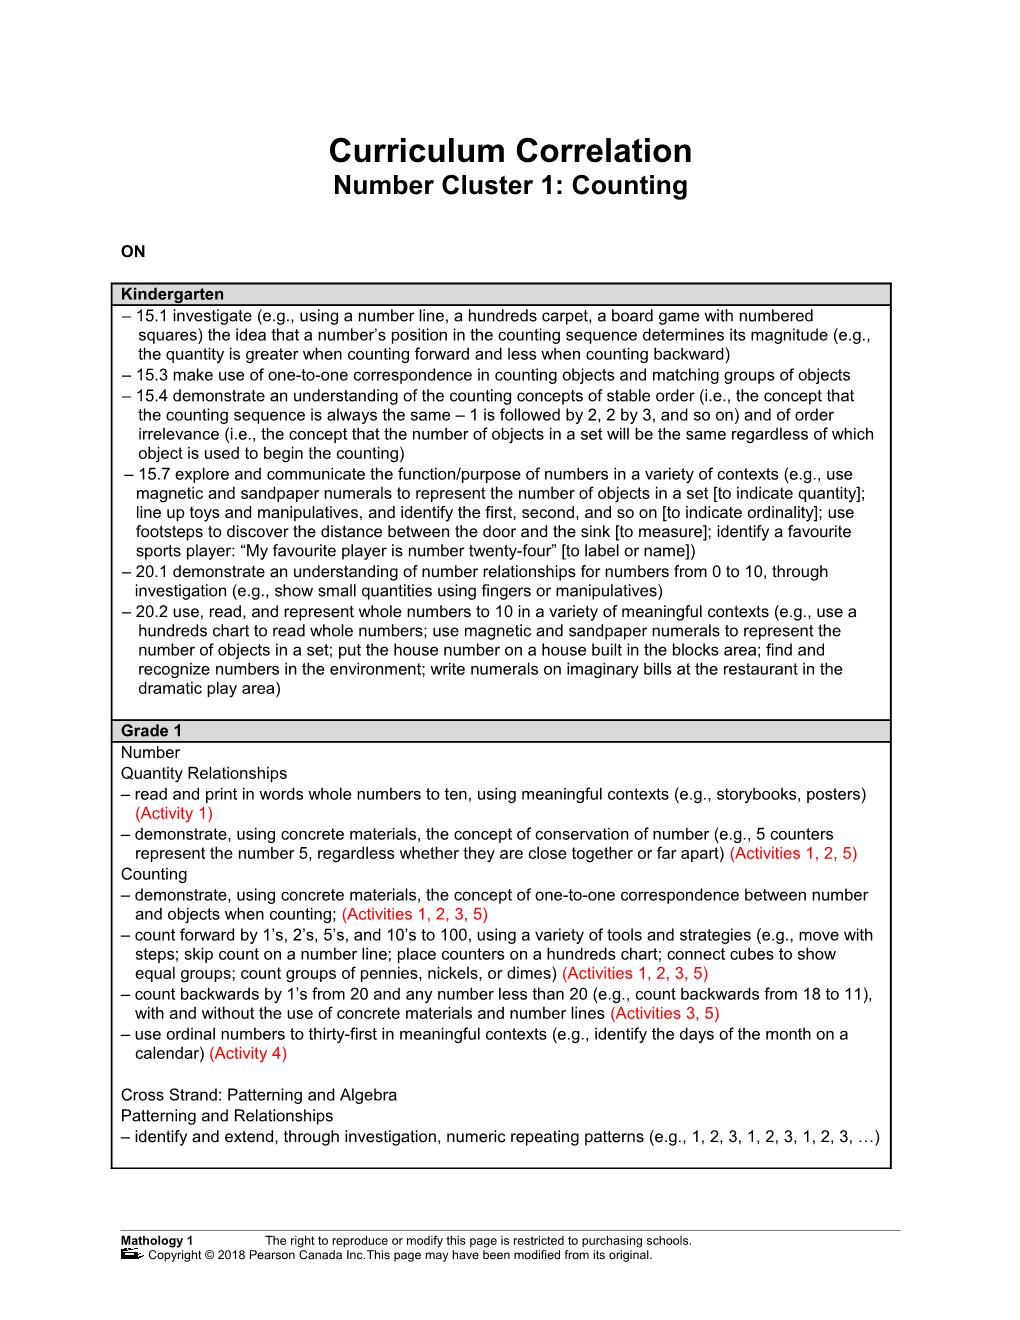 Number Cluster 1: Counting